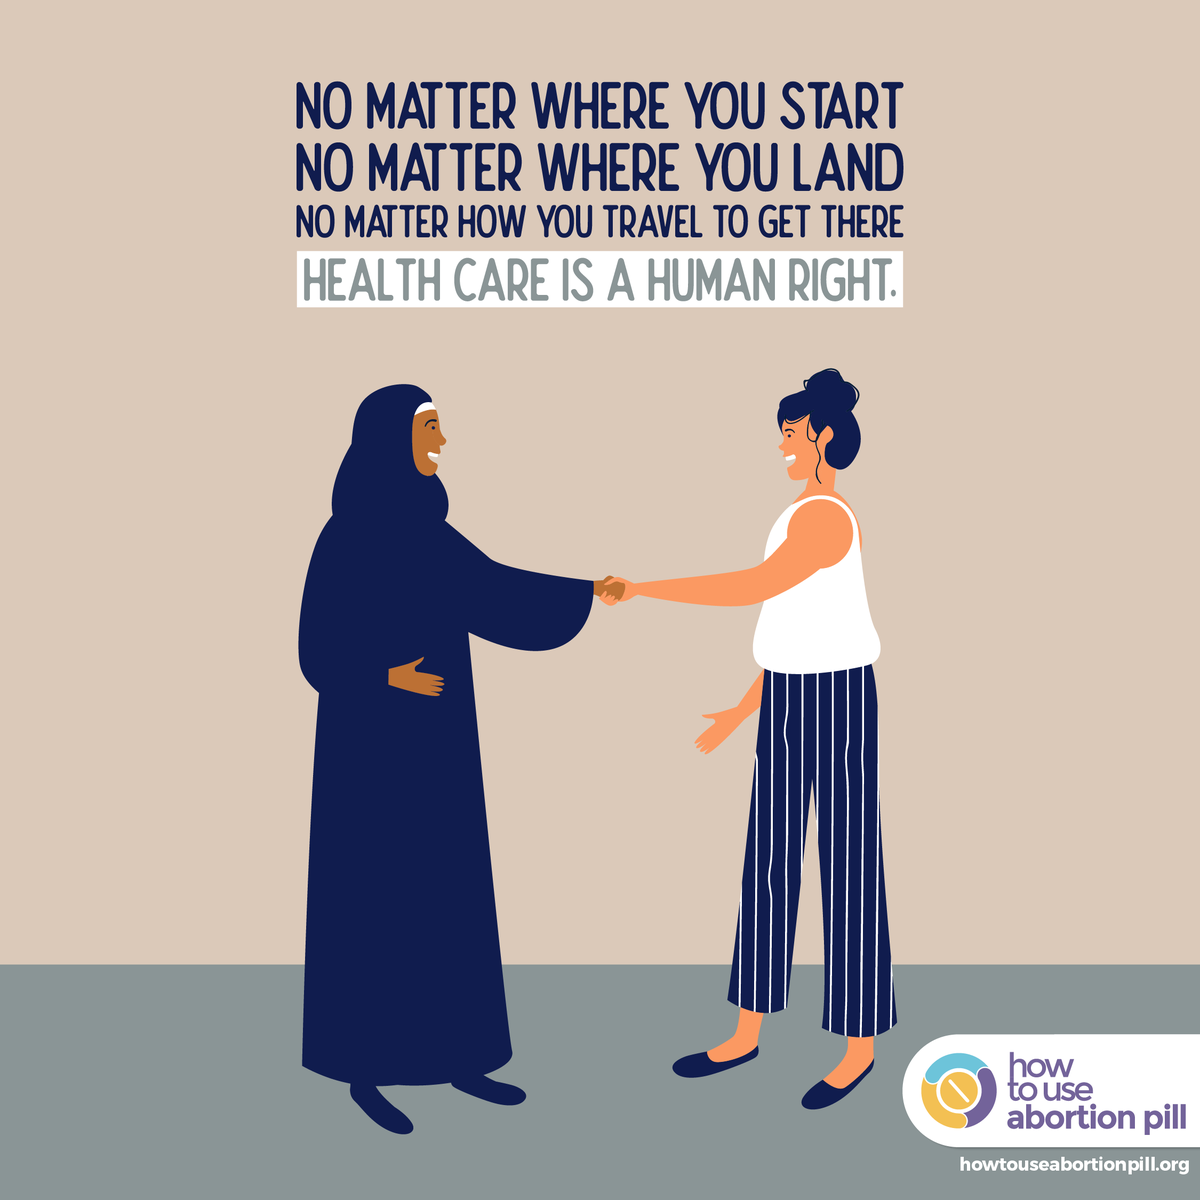 Today we honor #InternationalDayOfMigrants. 

For all those who have travelled in search of safety, stability, and opportunity, we stand with you. No matter where you start or where you end up, health care is a human right for all. 

#Migrants #AbortionAcccess #abortionrights